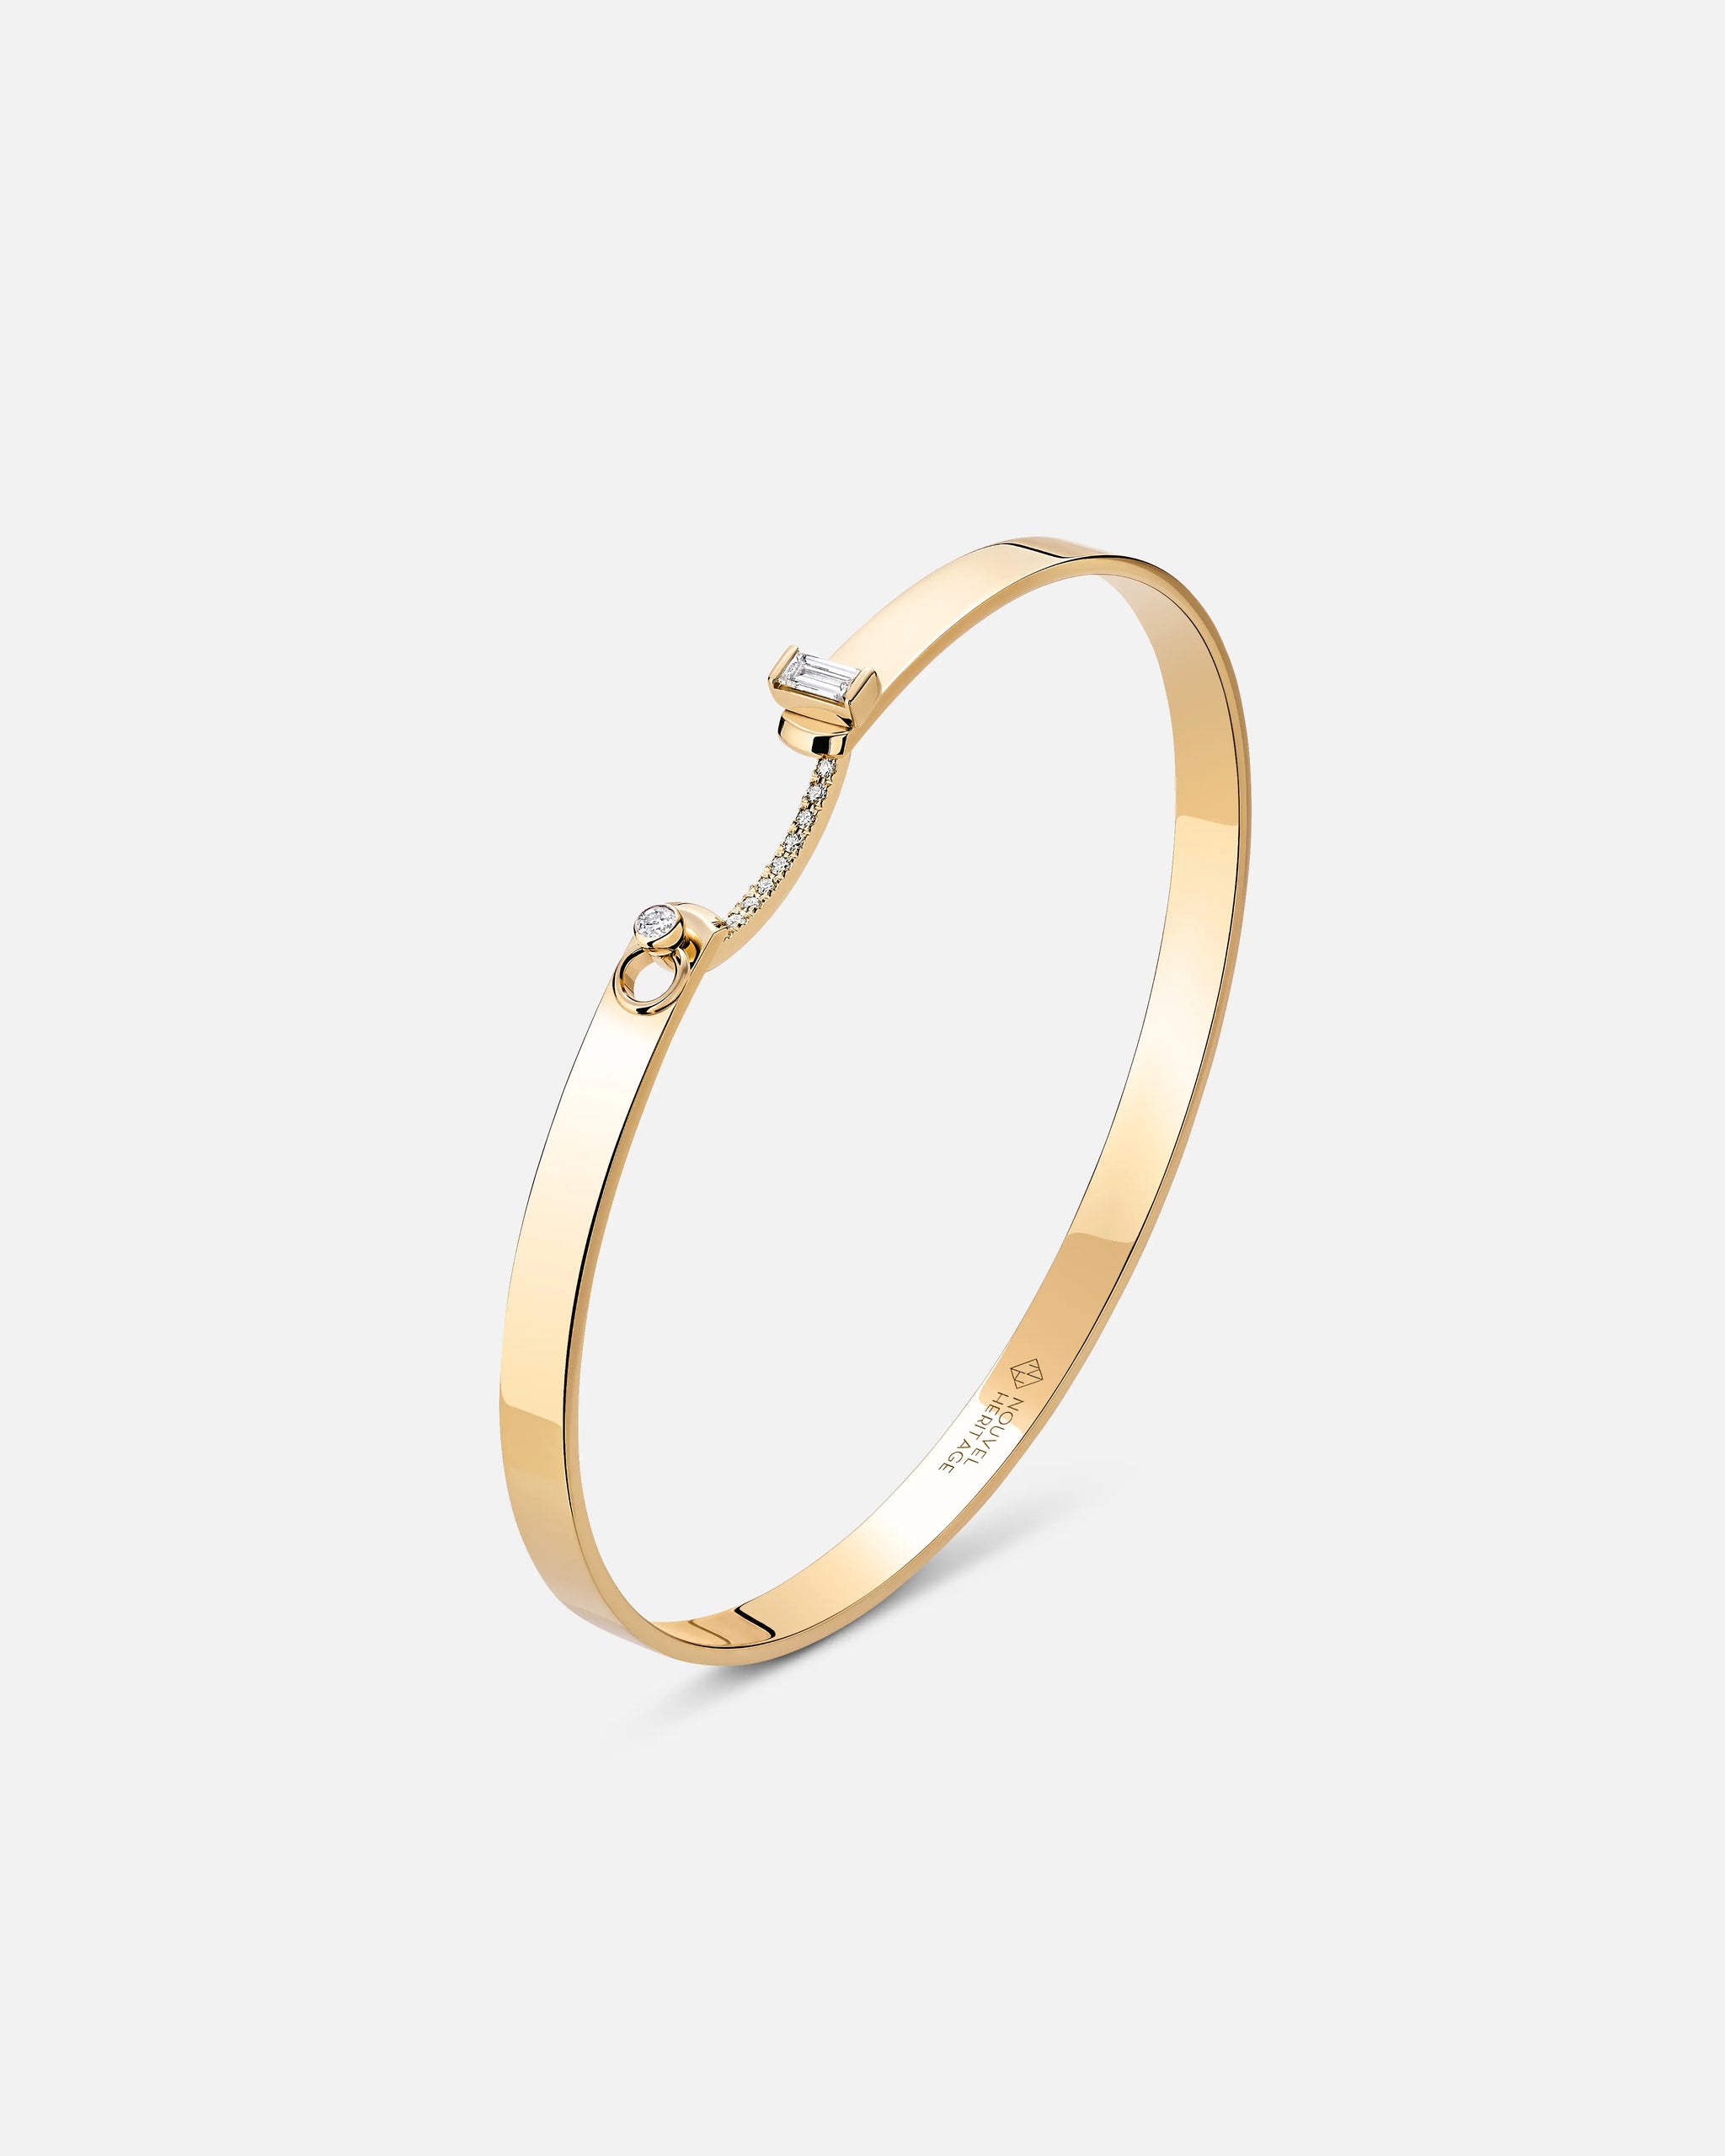 Dinner Date Mood Bangle in Yellow Gold - 1 - Nouvel Heritage